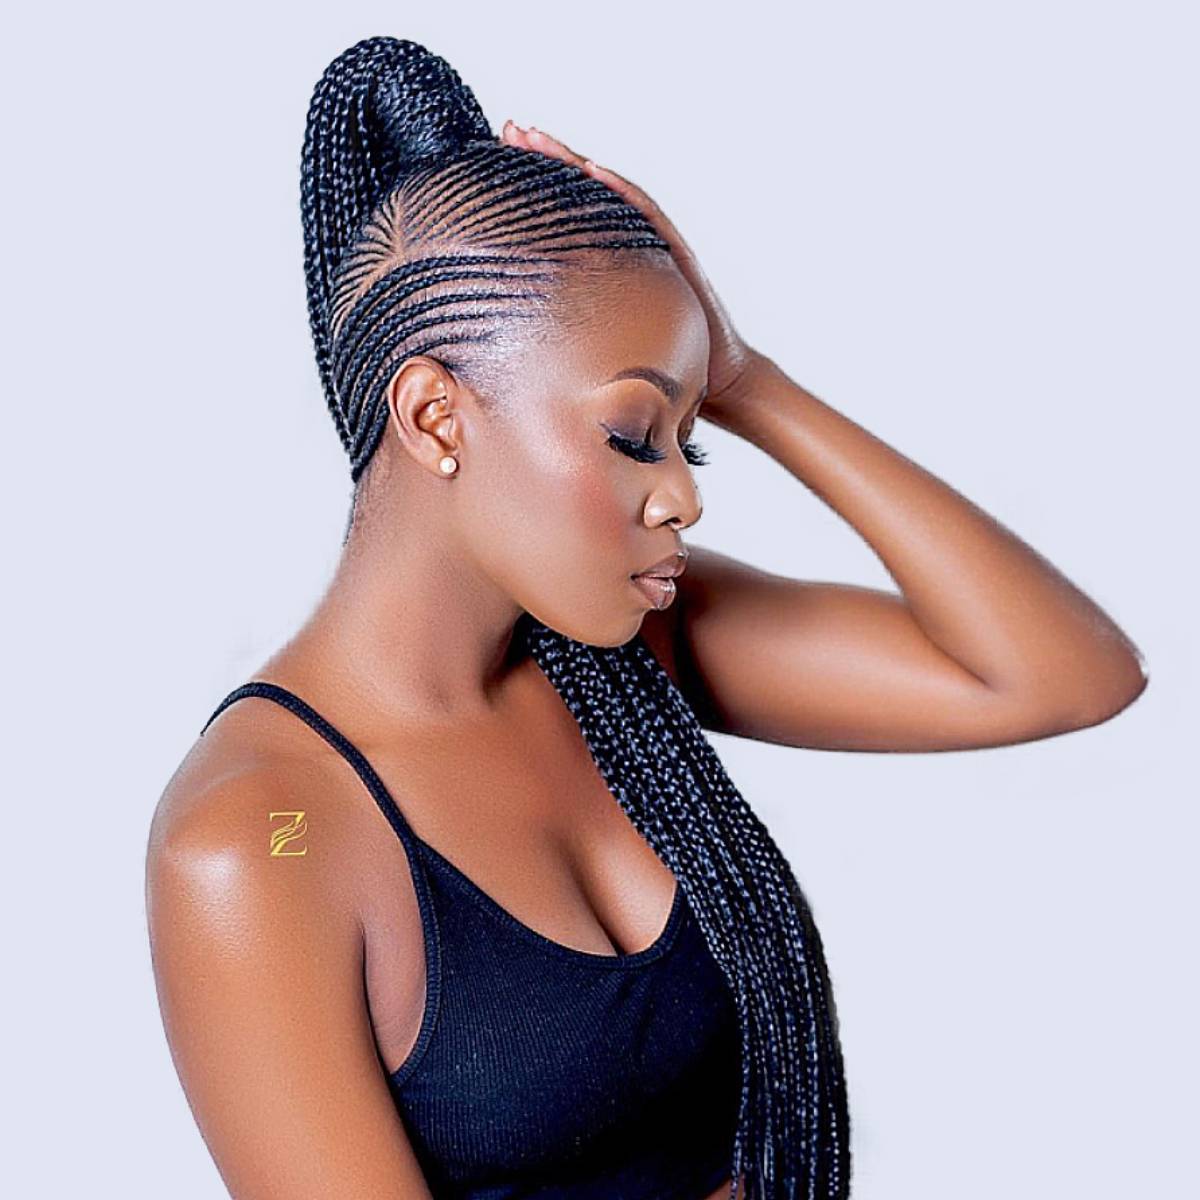 2021 Braided Hairstyle Ideas for Black Women – The Style News Network